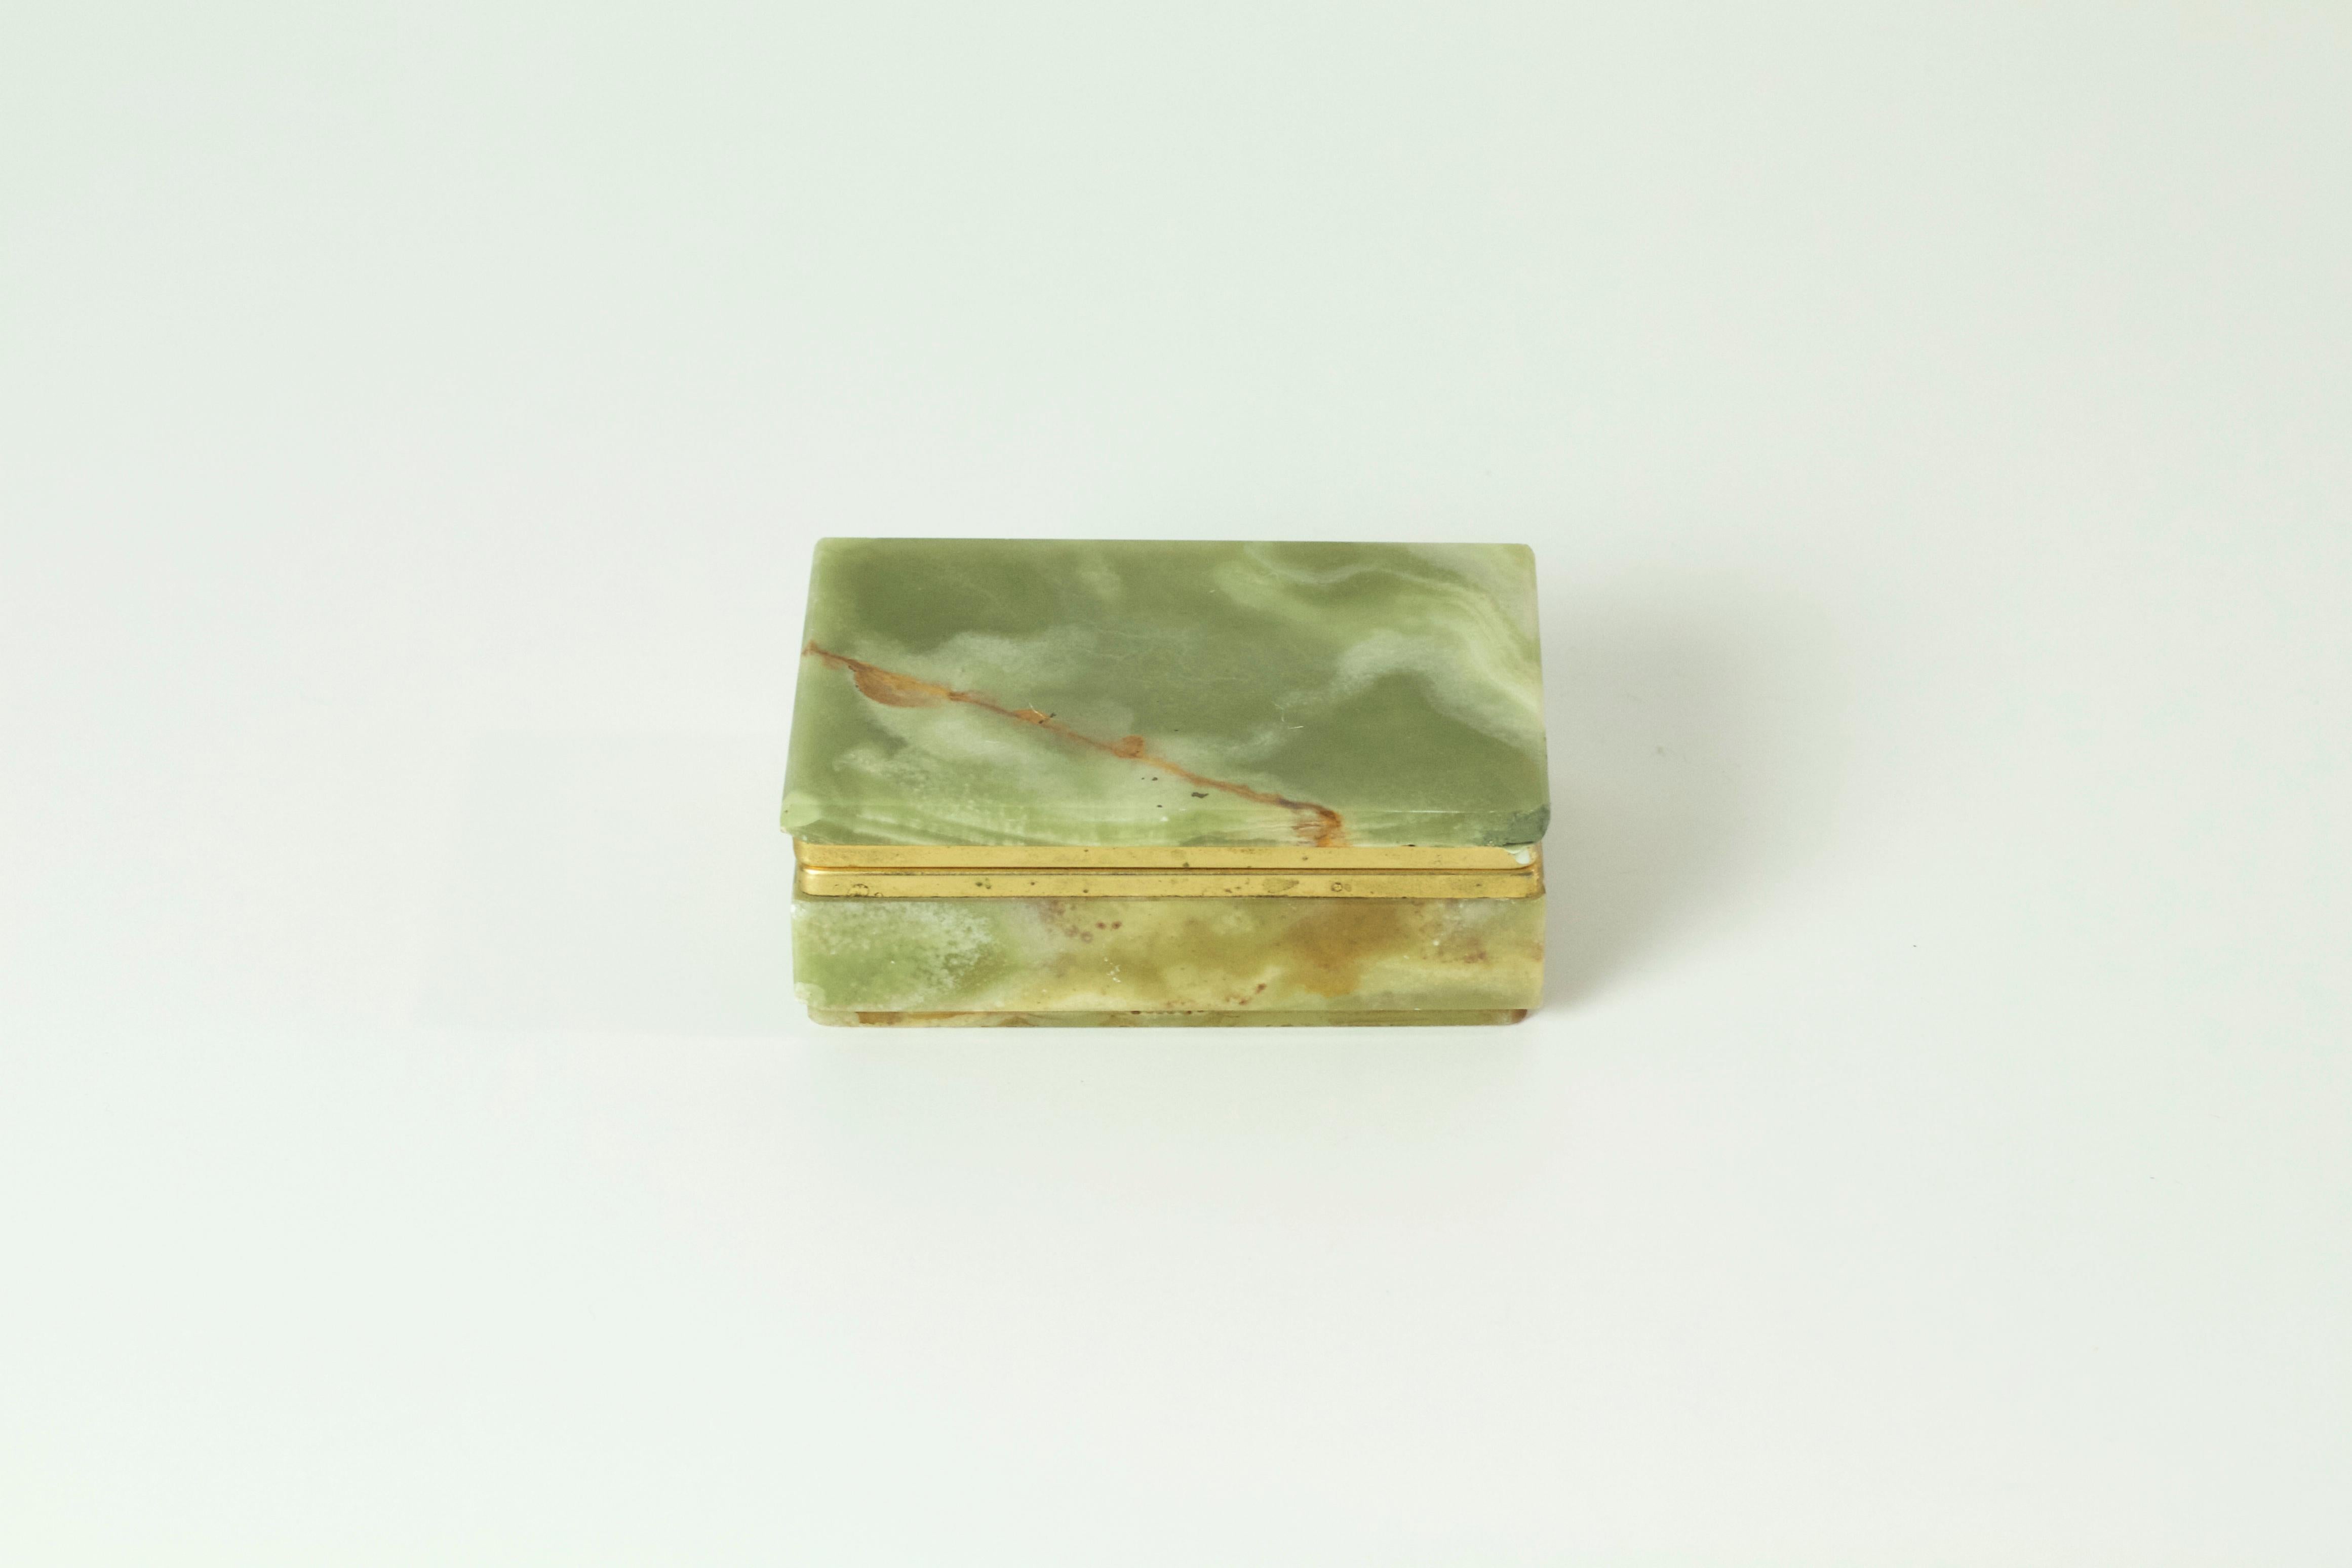 Trinket/jewelry box with a hinged lid made in Italy from Pakistani onyx and brass gilded in gold. The onyx has a range of all natural colors from brown to green which is seen in this piece as well. No chipping or cracks.